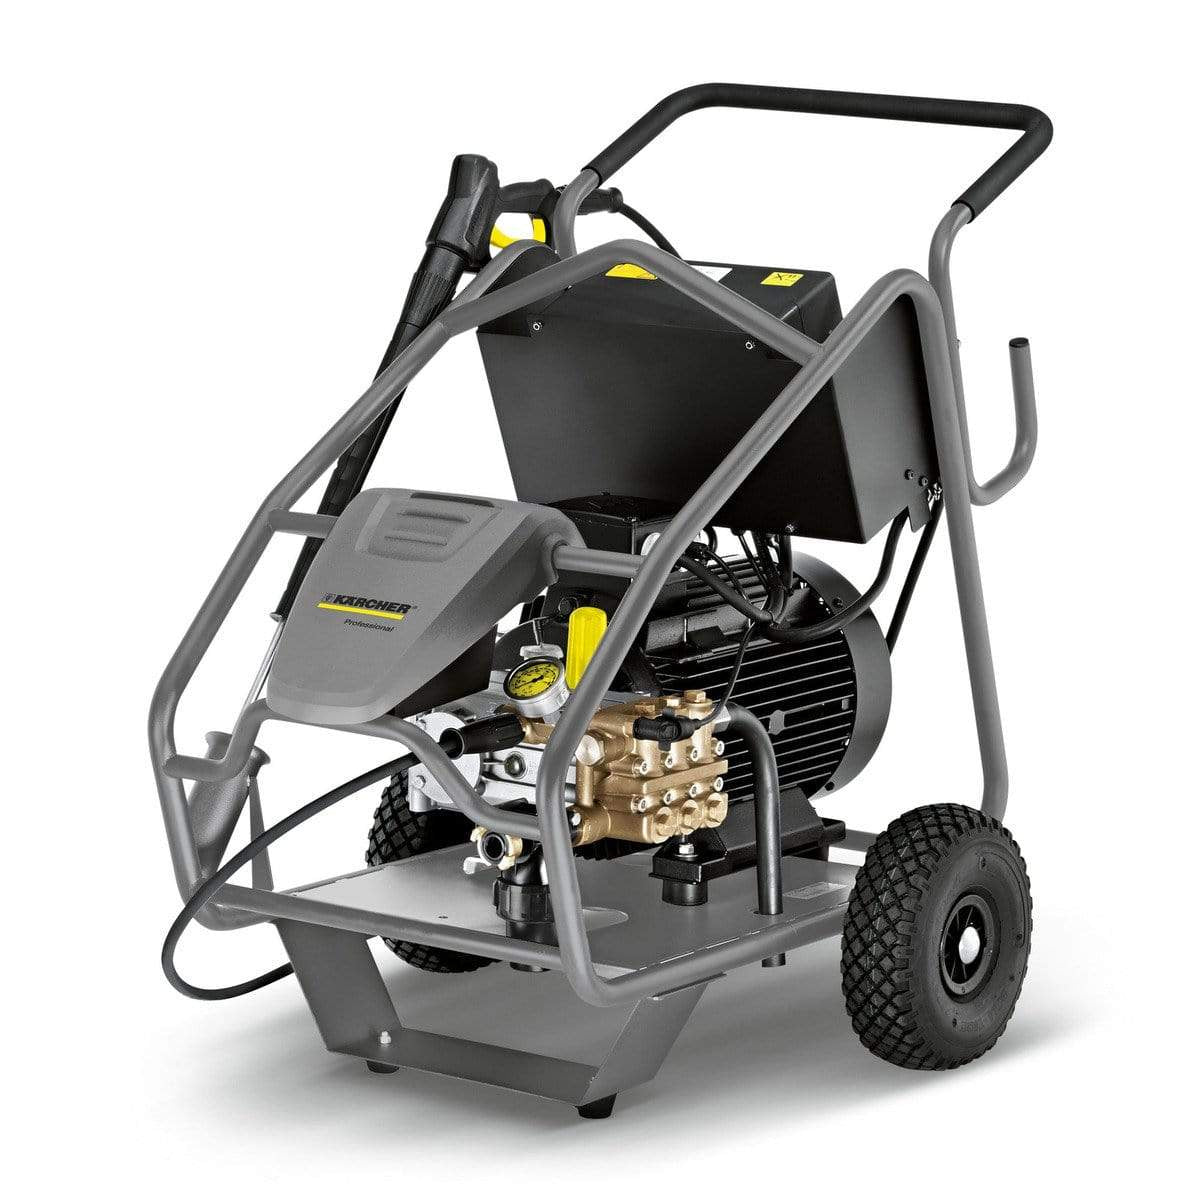 Karcher Ultra-High Pressure Washer - HD 9/50-4 Cage | Supply Master | Accra, Ghana Tools Building Steel Engineering Hardware tool